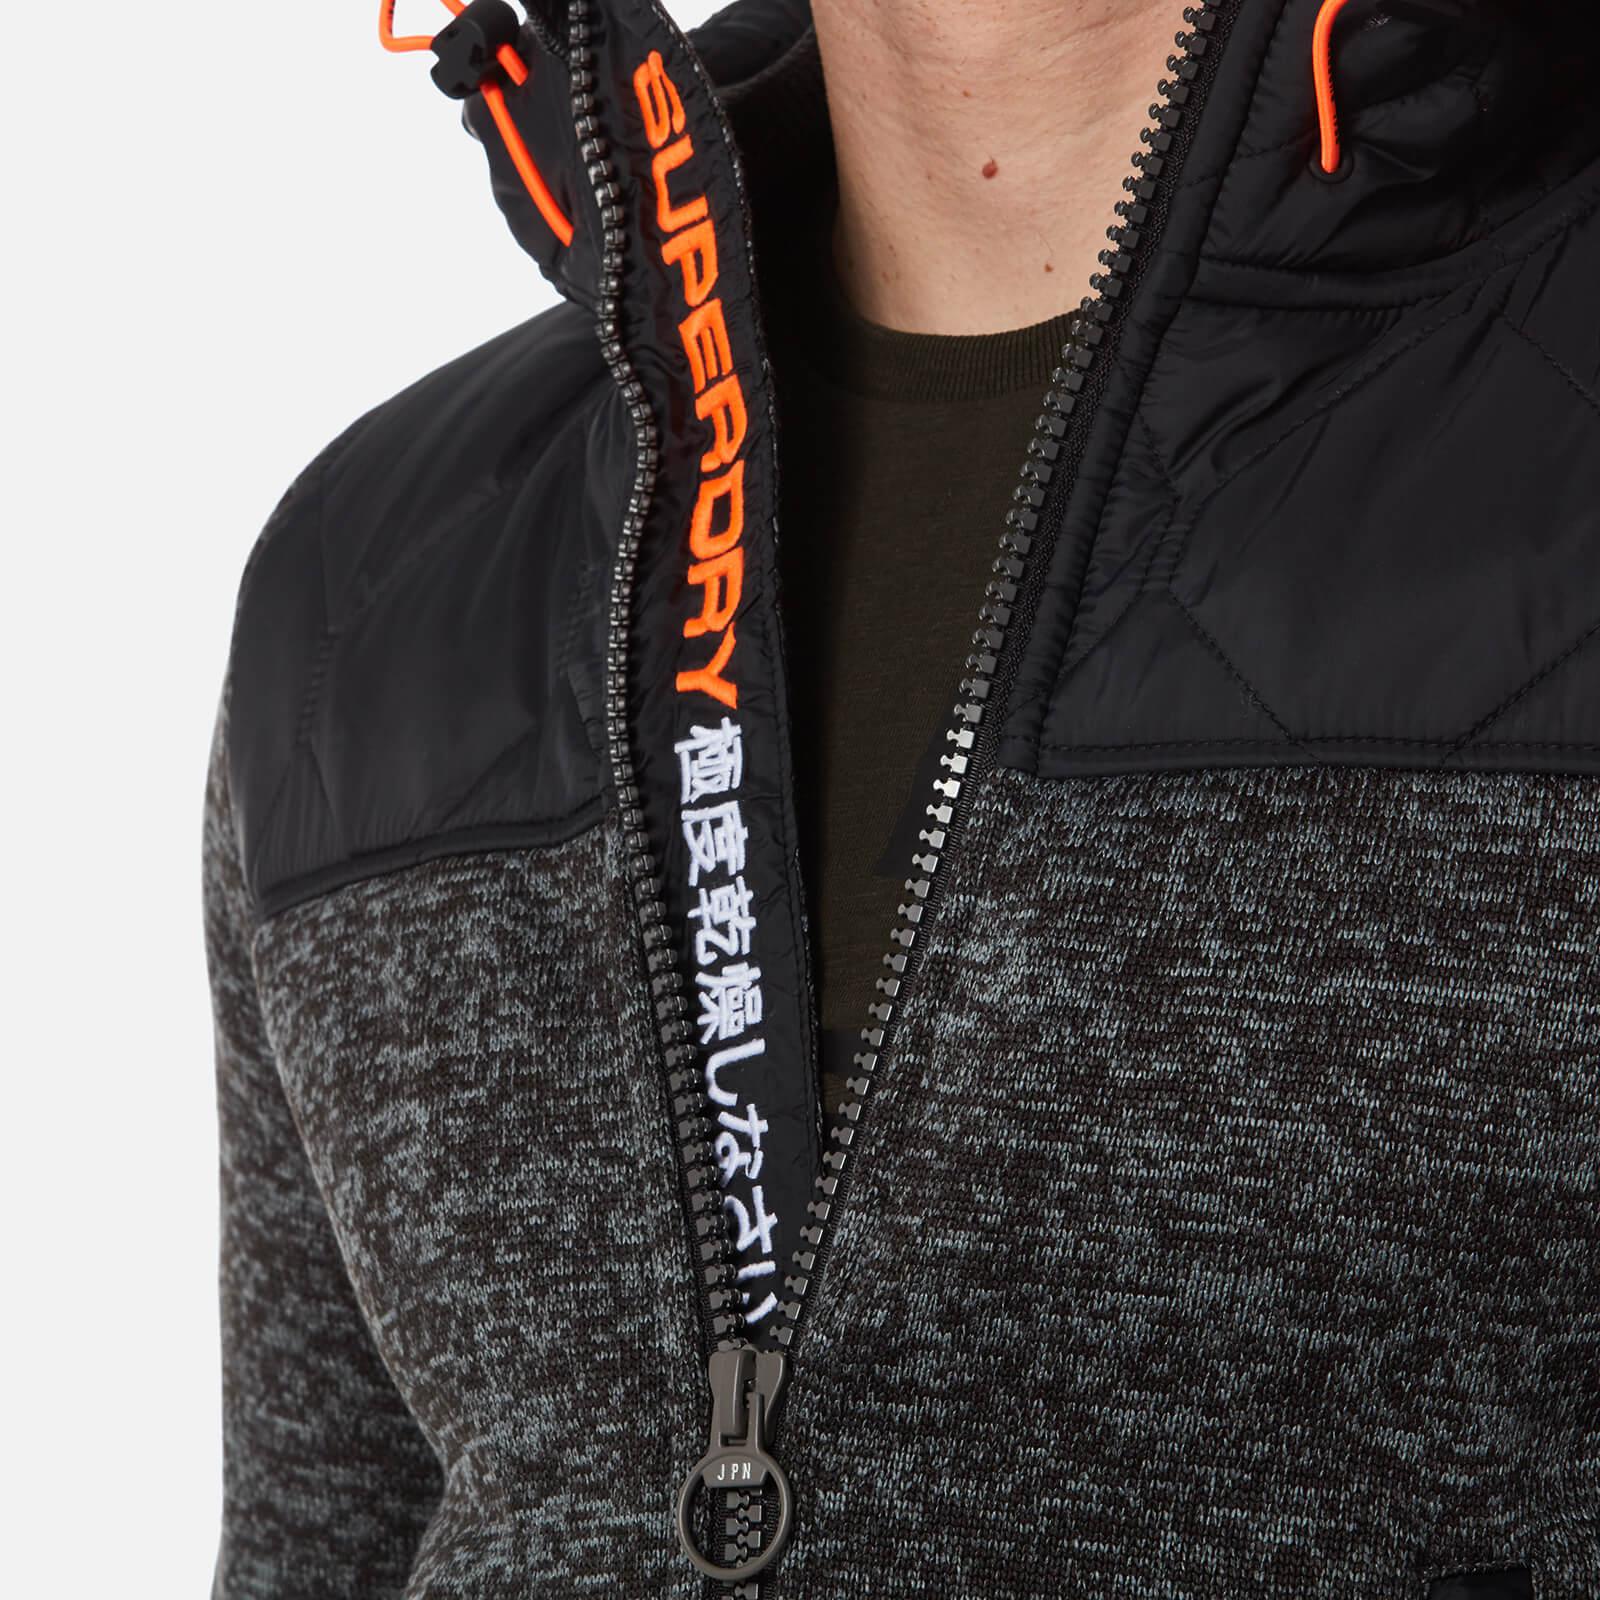 Superdry Storm Mountain Finland, SAVE 40% - www.pnsb.org